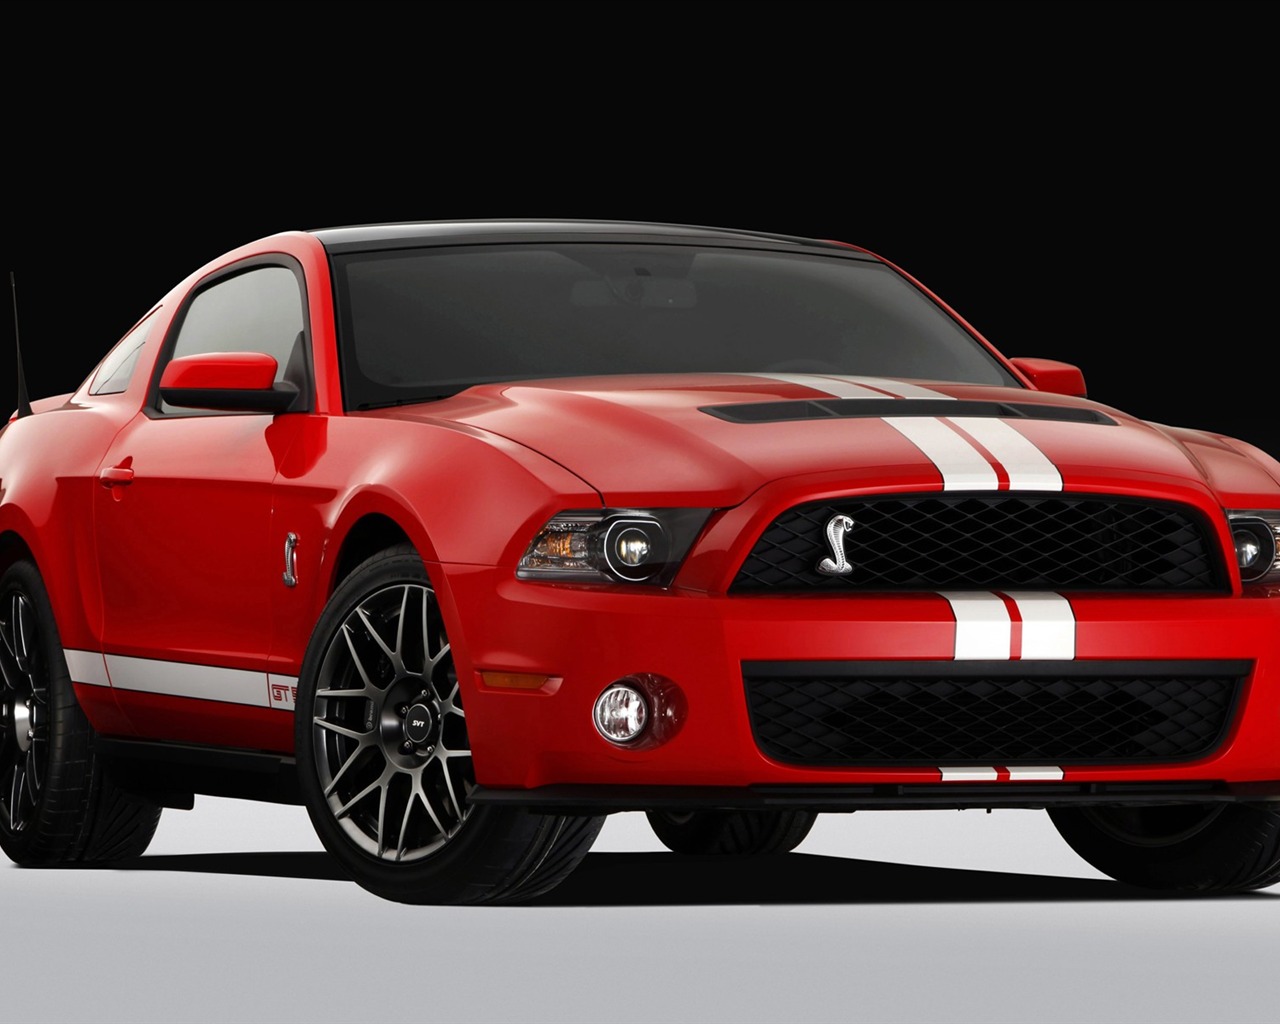 Ford Mustang GT500 Wallpapers #1 - 1280x1024